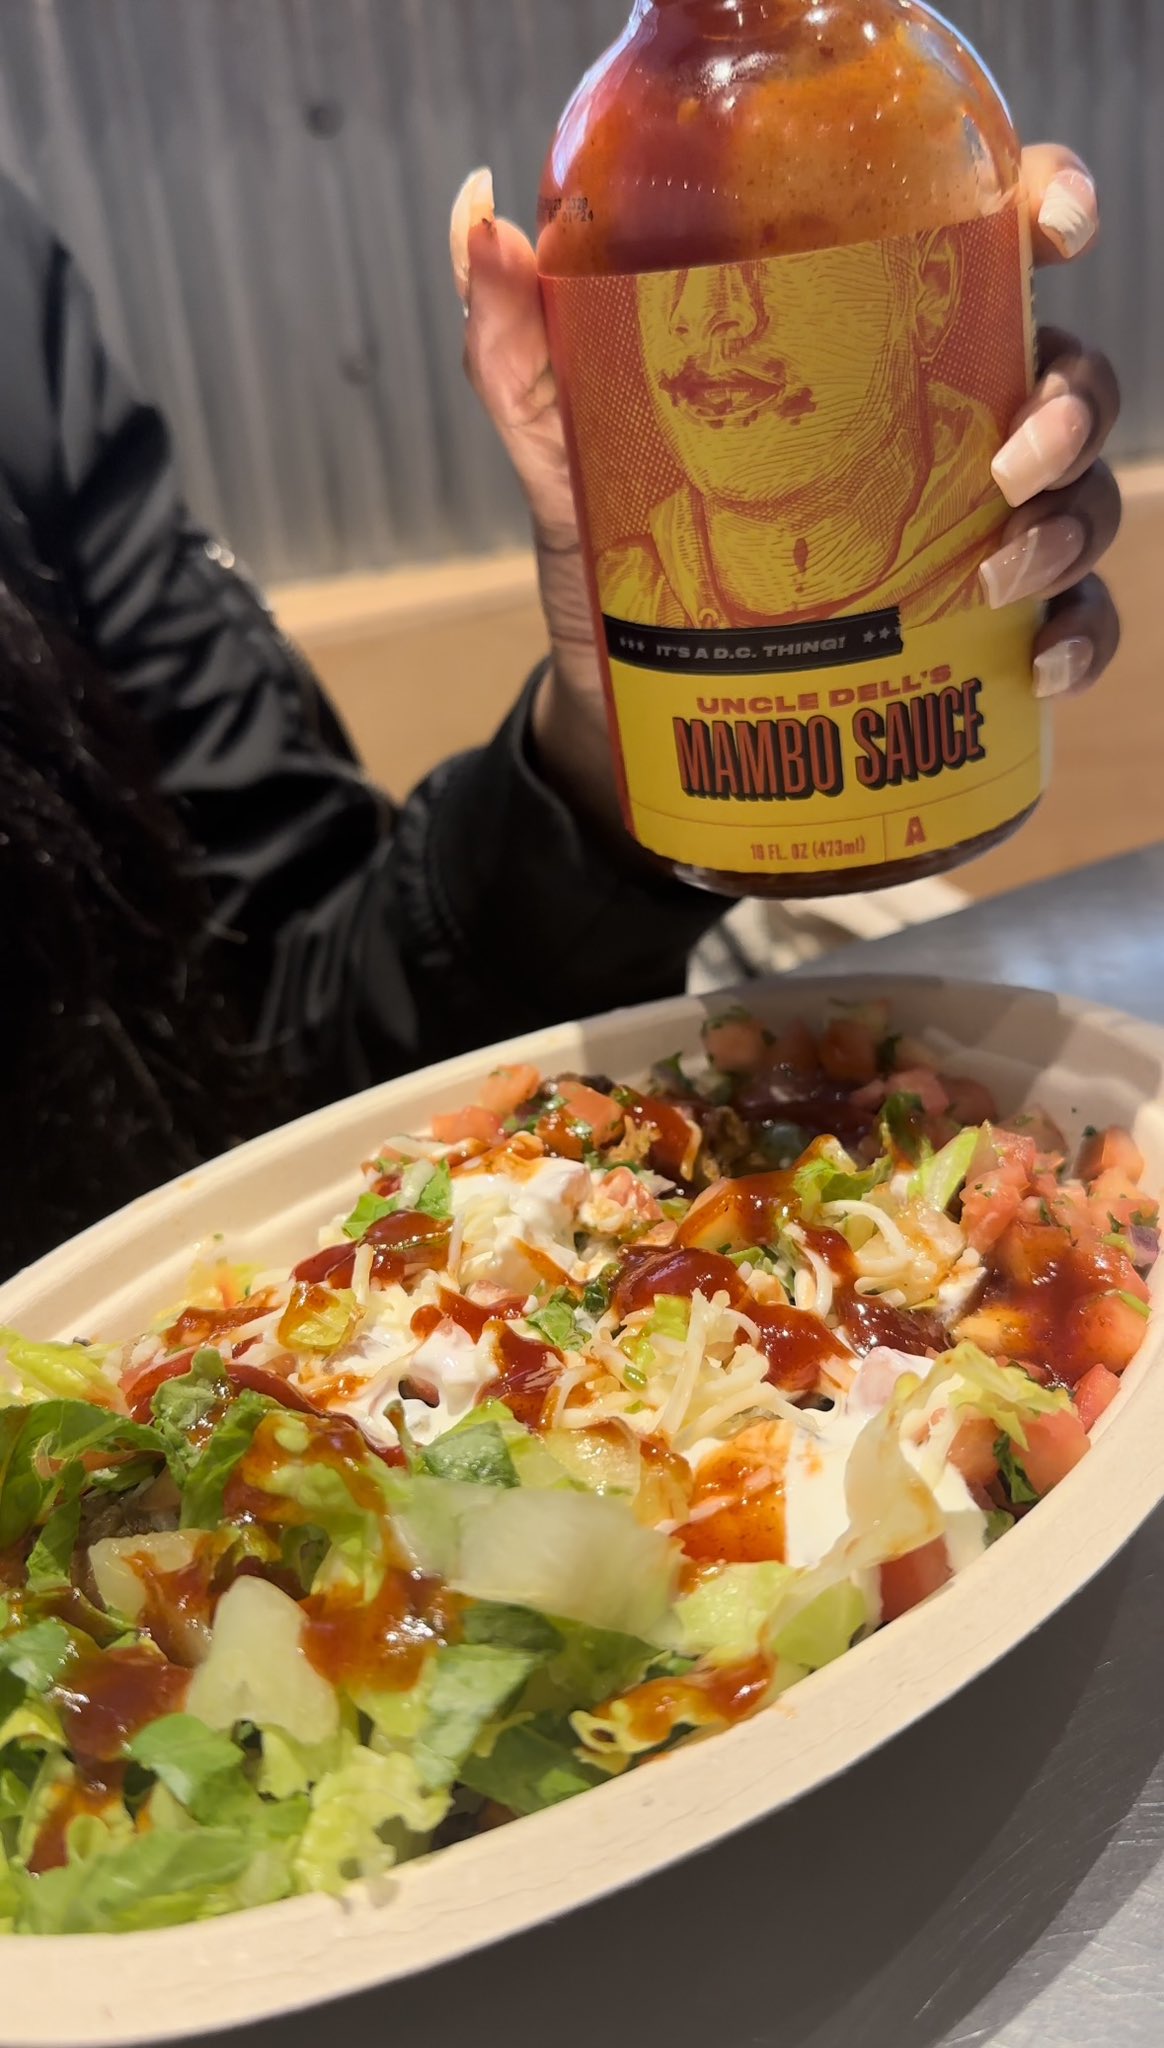 Uncle Dell's Mambo Sauce - Spicy – Andy Factory